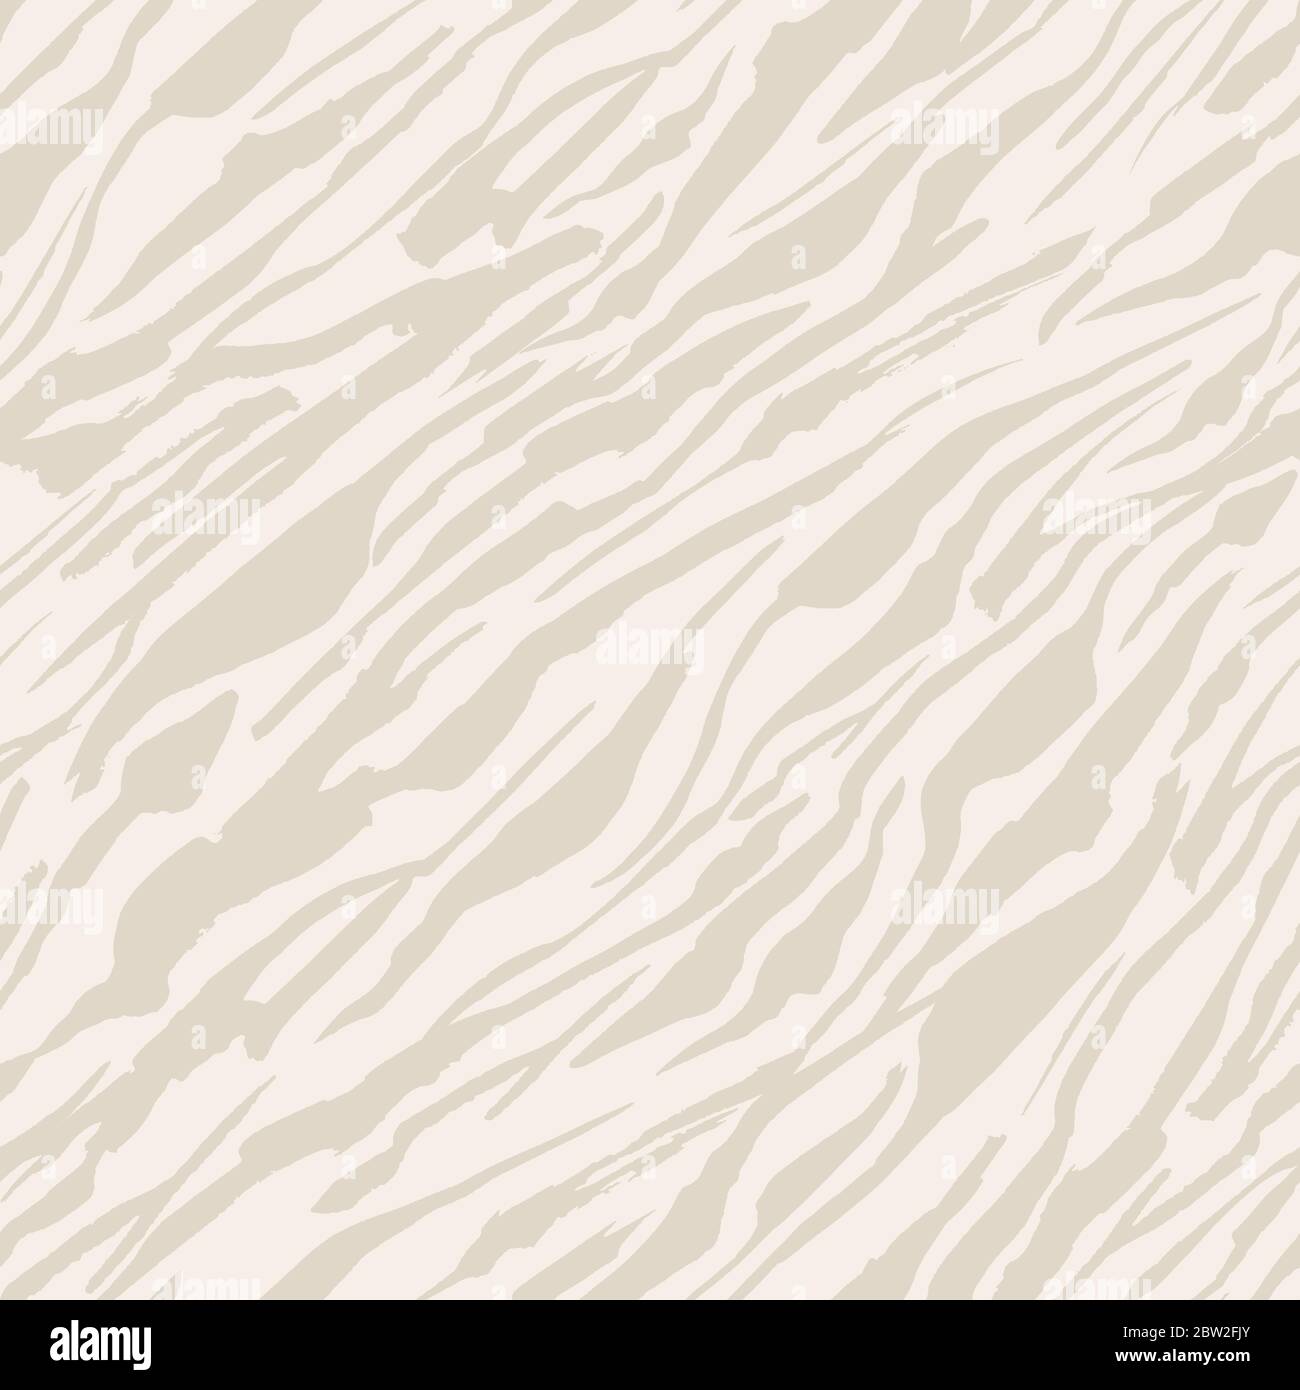 Abstract Safari pattern, white tiger or zebra seamless print, vector background. African safari wild animal fur skin pattern with beige stripes, simple flat modern decoration background Stock Vector